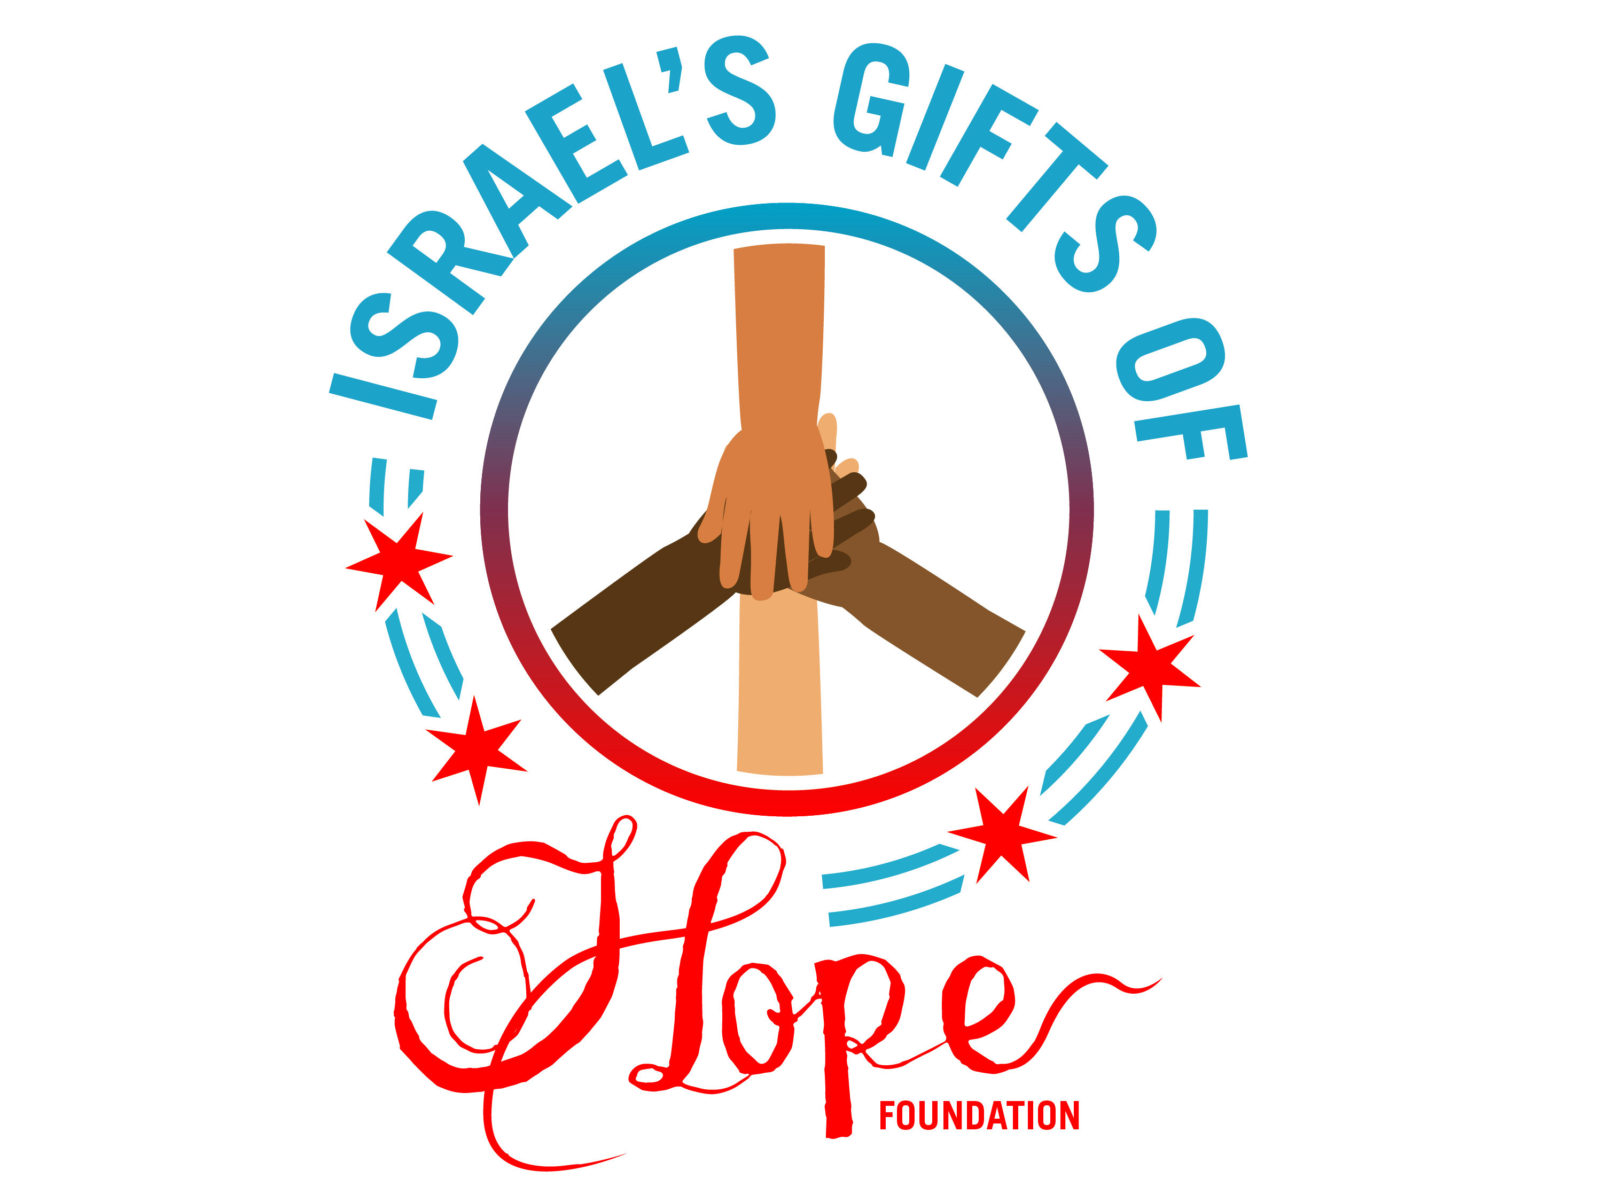 Contact Us Israel's Gifts of Hope Foundation